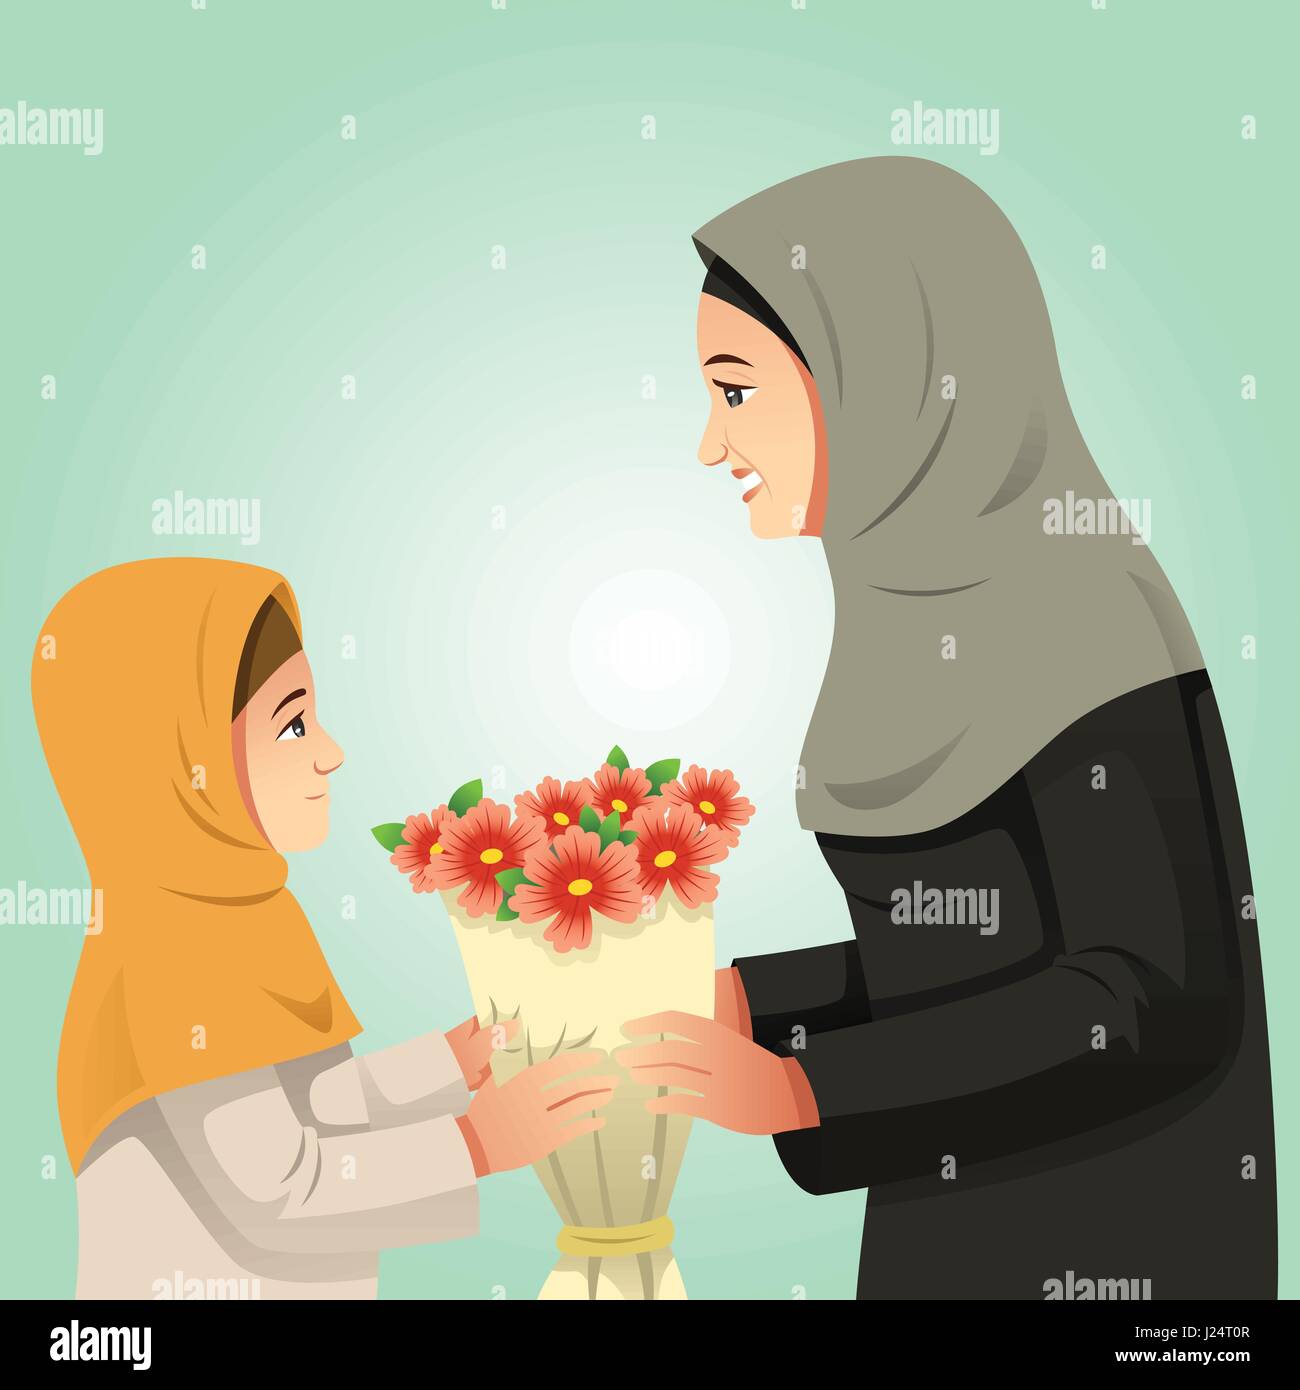 Girl Giving Flowers Stock Vector Images Alamy